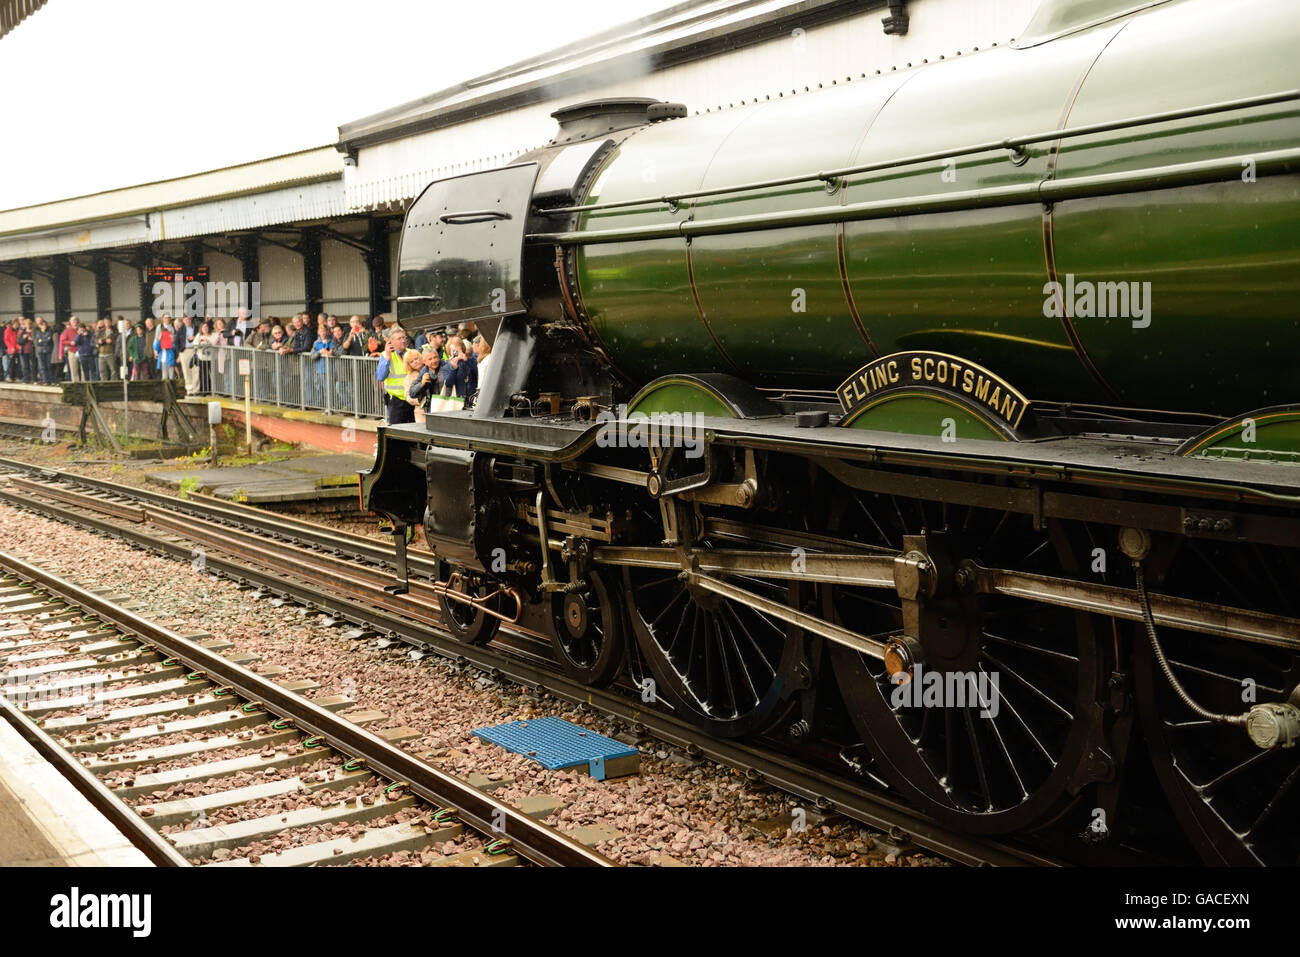 World famous steam locomotive "Flying Scotsman" surrounded by crowds at Salisbury station on 21st May 2016. Stock Photo